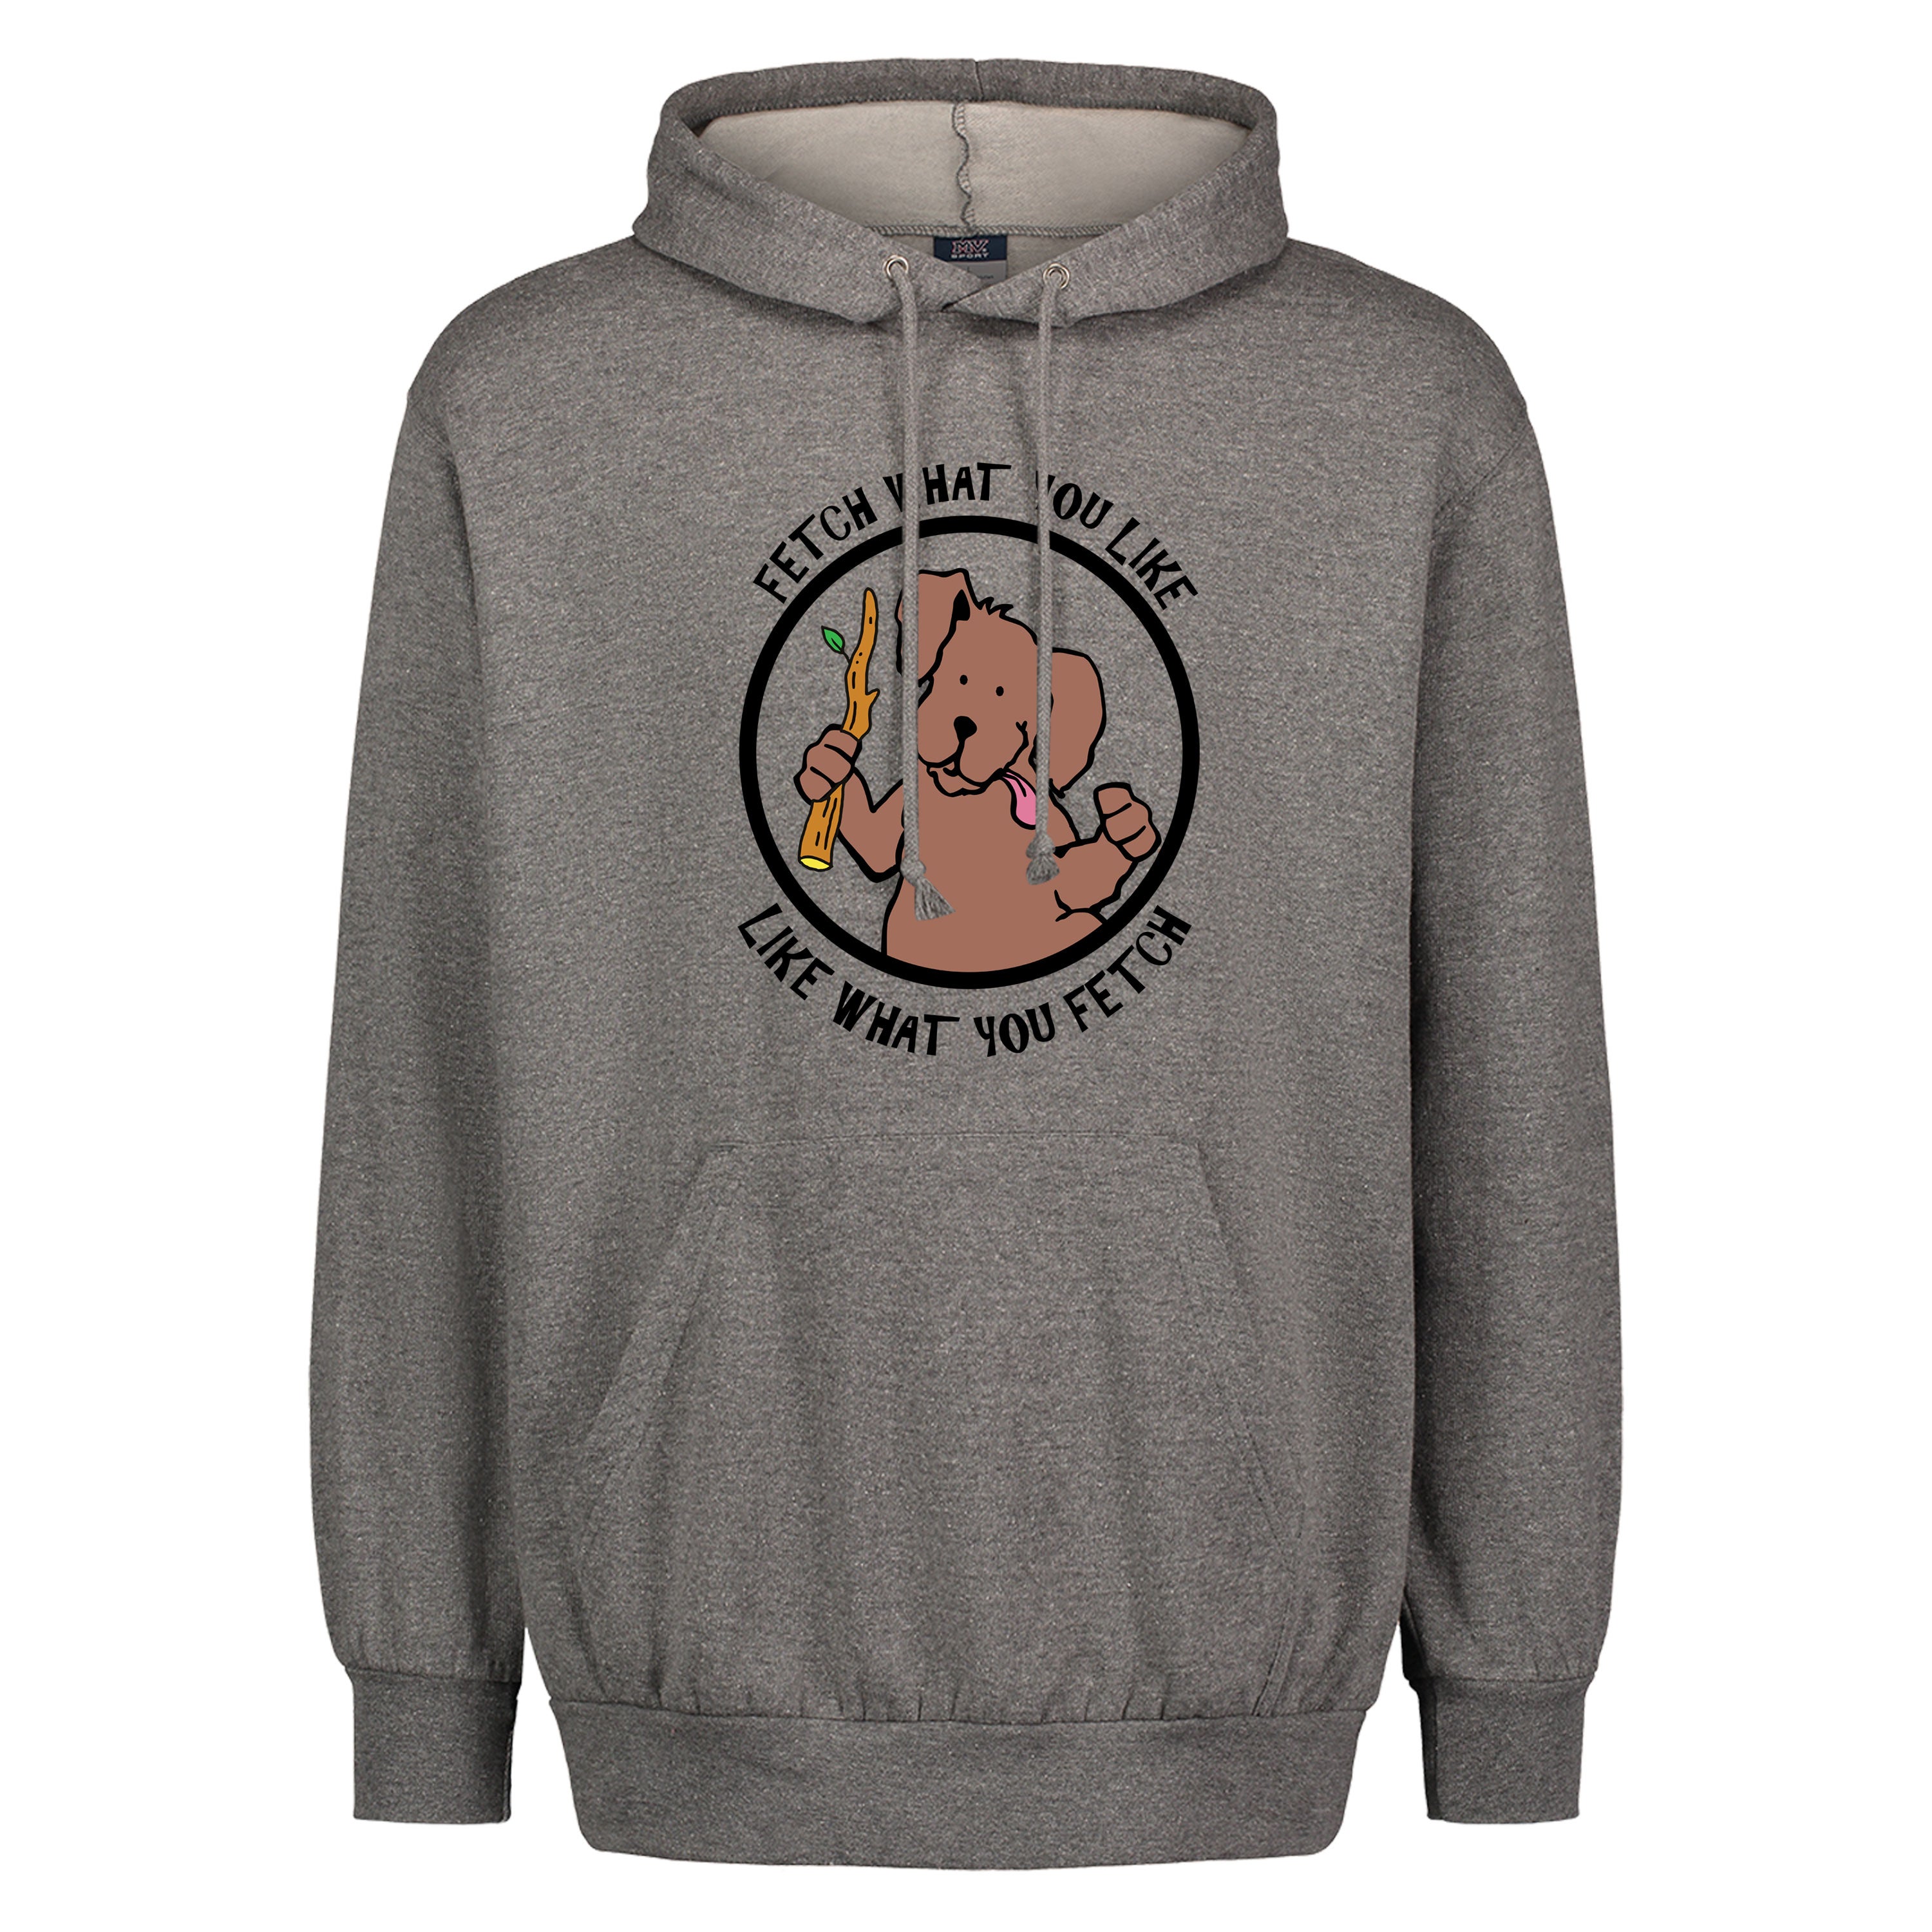 Fetch what you like comfort hoodie